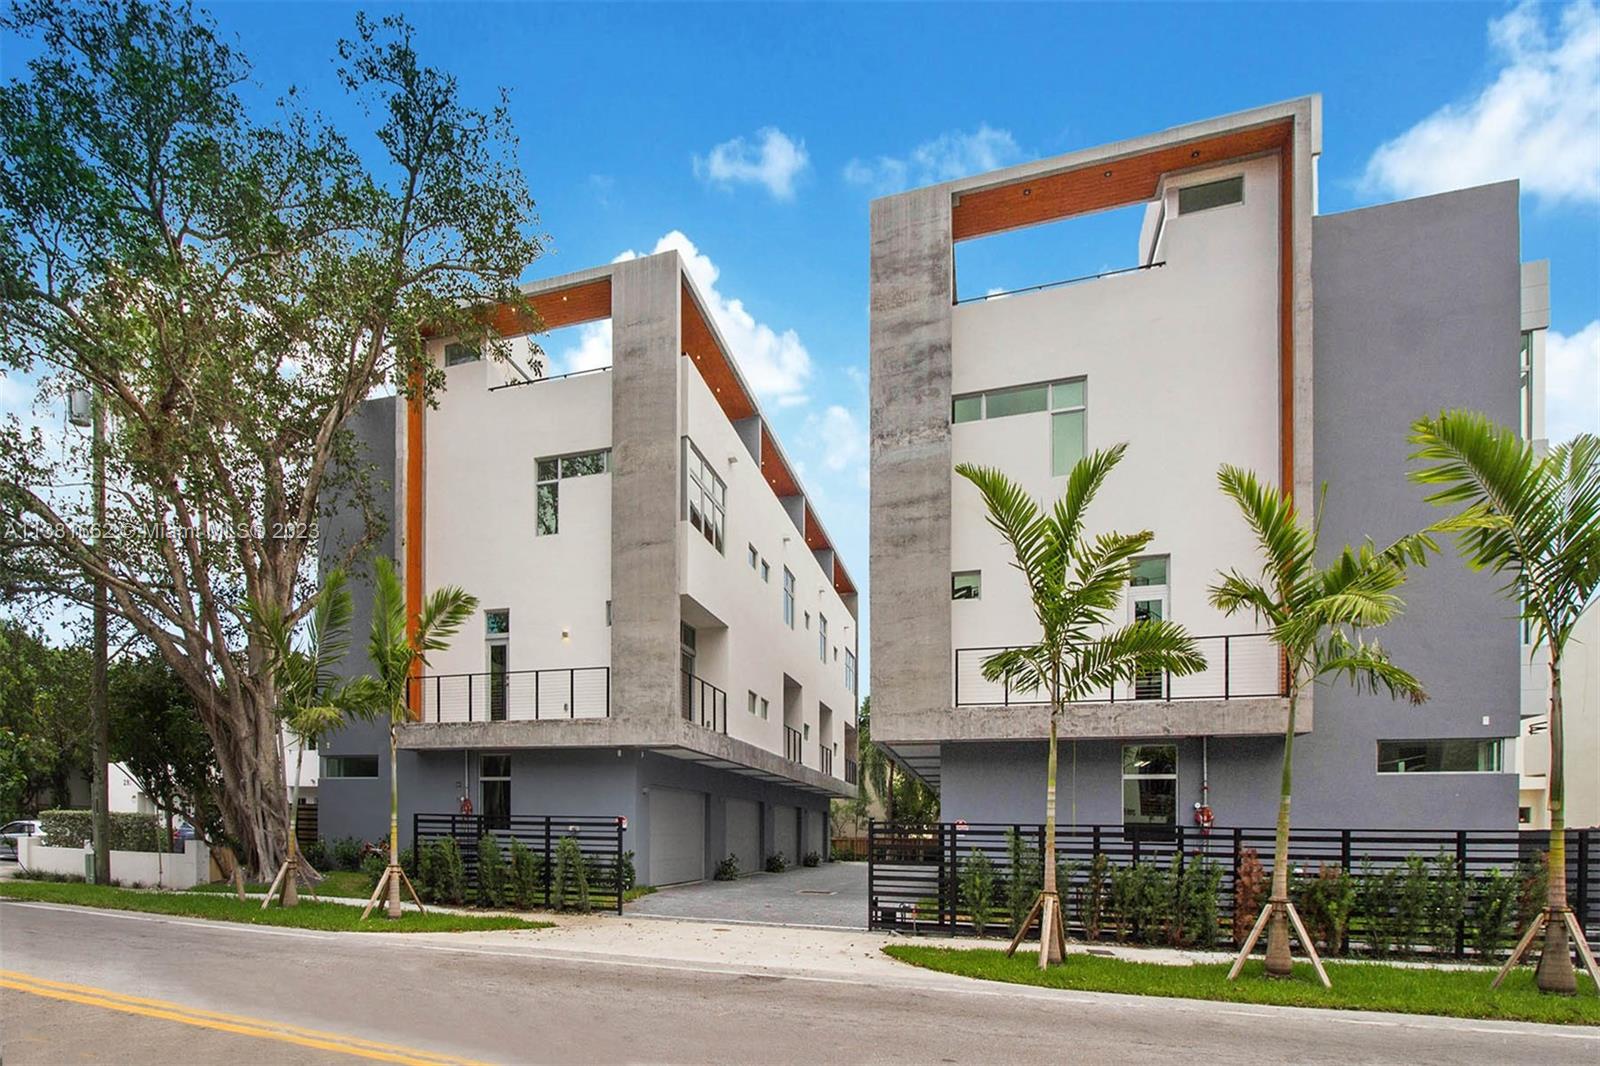 Live in the heart of Coconut Grove in a newer boutique community with 8 urban townhouses. Flexible floor plan with a total of 3 bedrooms and 3 full bathrooms. All Bosch appliances and custom modern finishes including a separate laundry room with impact glass windows and doors. Large private outdoor rooftop terrace with endless possibilities to create a summer kitchen and living area to soak in the Miami breezes off the Bay. Best walkability to newly redesigned CocoWalk, cafes, restaurants, offices, and parks in Coconut Grove. Centrally located to Miami International Airport, Coral Gables, and Downtown Miami. A must consider if you are looking to live or invest in the adored 33133. Opportunity to live in the Village on the Bay!